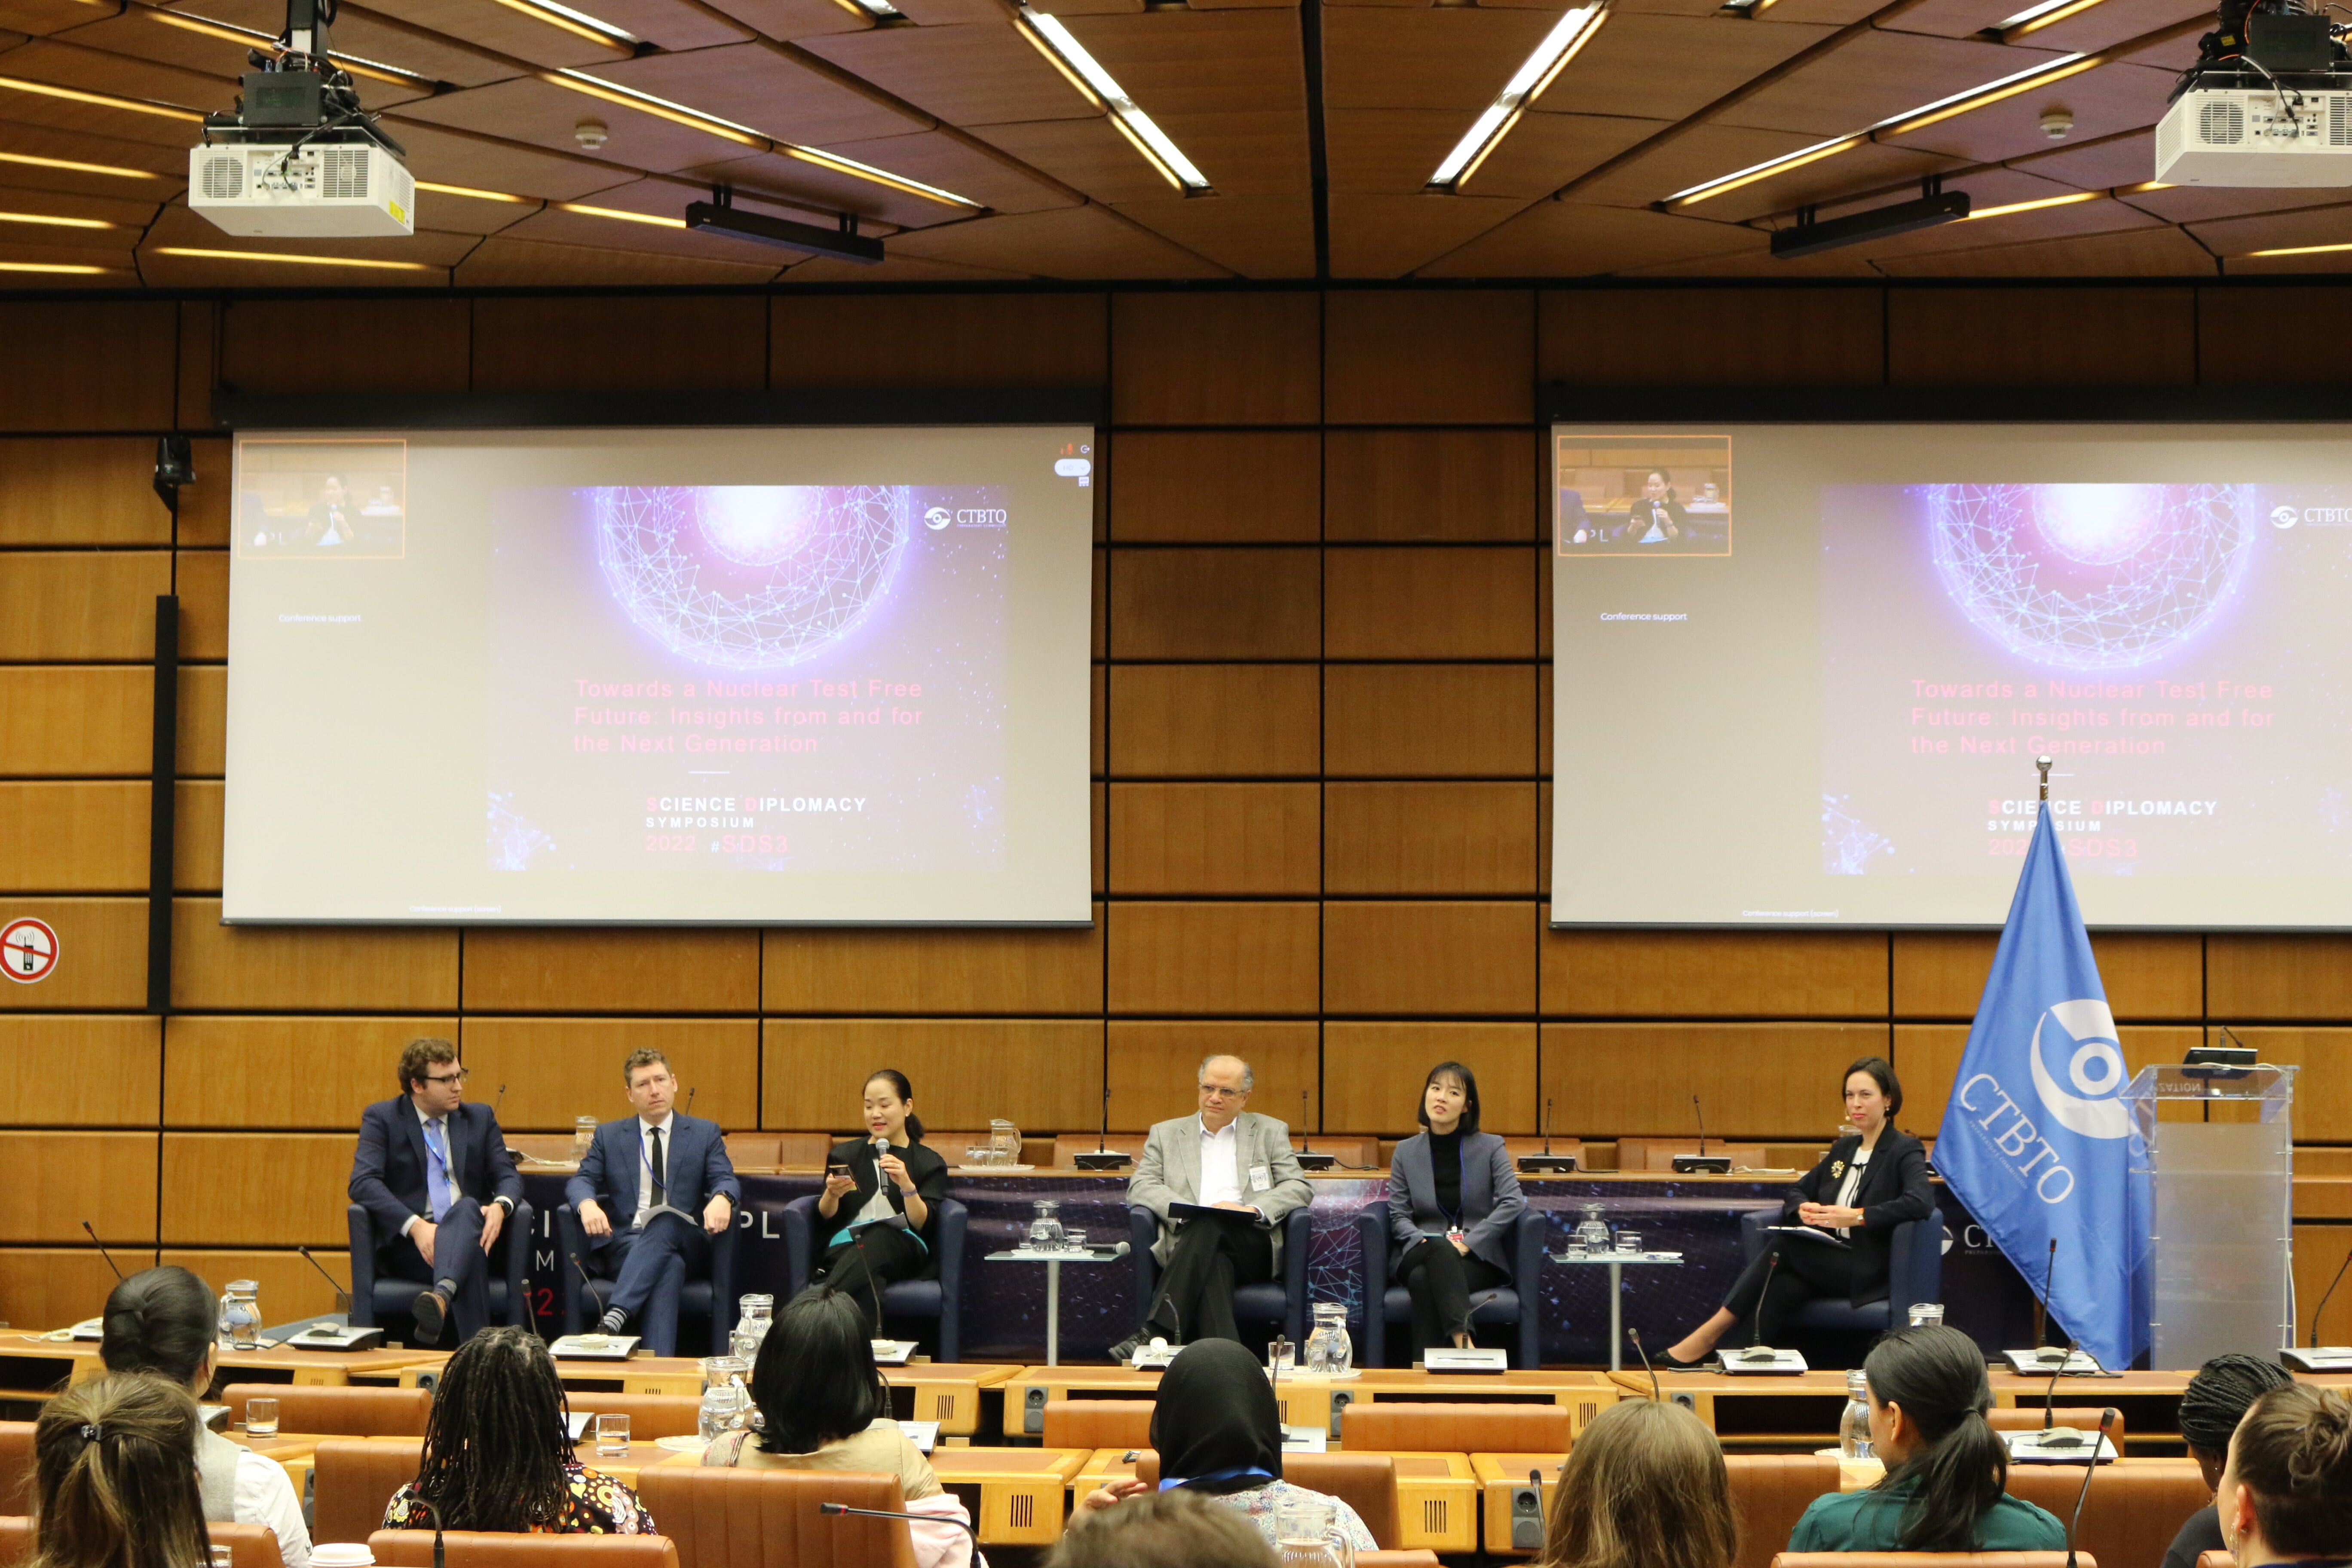 Ms. Soo Hyun Kim, UNODA’s #Youth4Disarmament lead, delivers remarks on ways "towards a nuclear-test-free future” with insights from and for the next generation at CTBT’s Science Diplomacy Symposium 